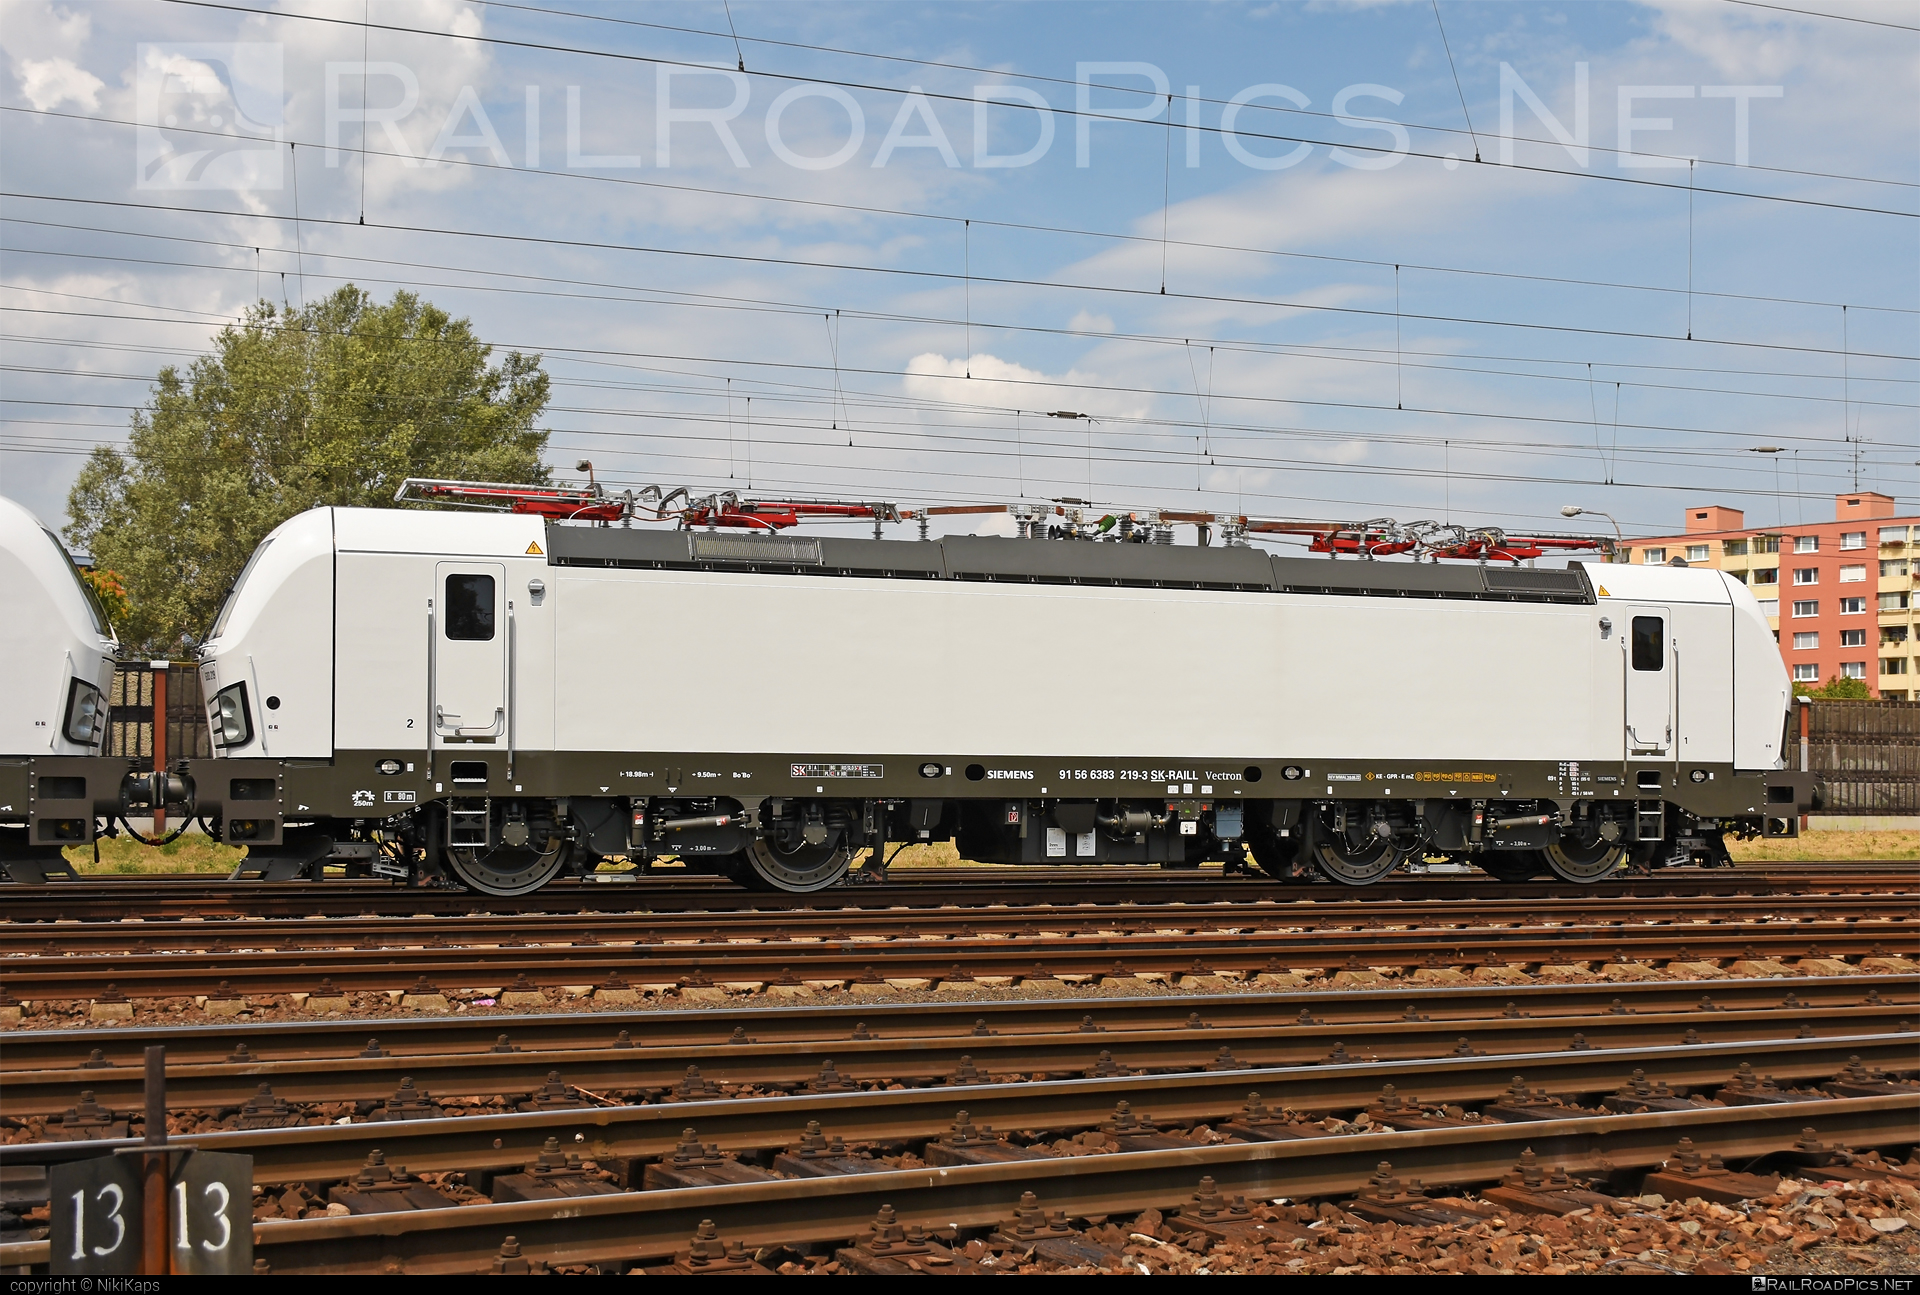 Siemens Vectron MS - 6383 219 operated by LOKORAIL, a.s. #RollingStockLease #RollingStockLeaseSro #budamar #lokorail #lrl #raill #siemens #siemensVectron #siemensVectronMS #vectron #vectronMS